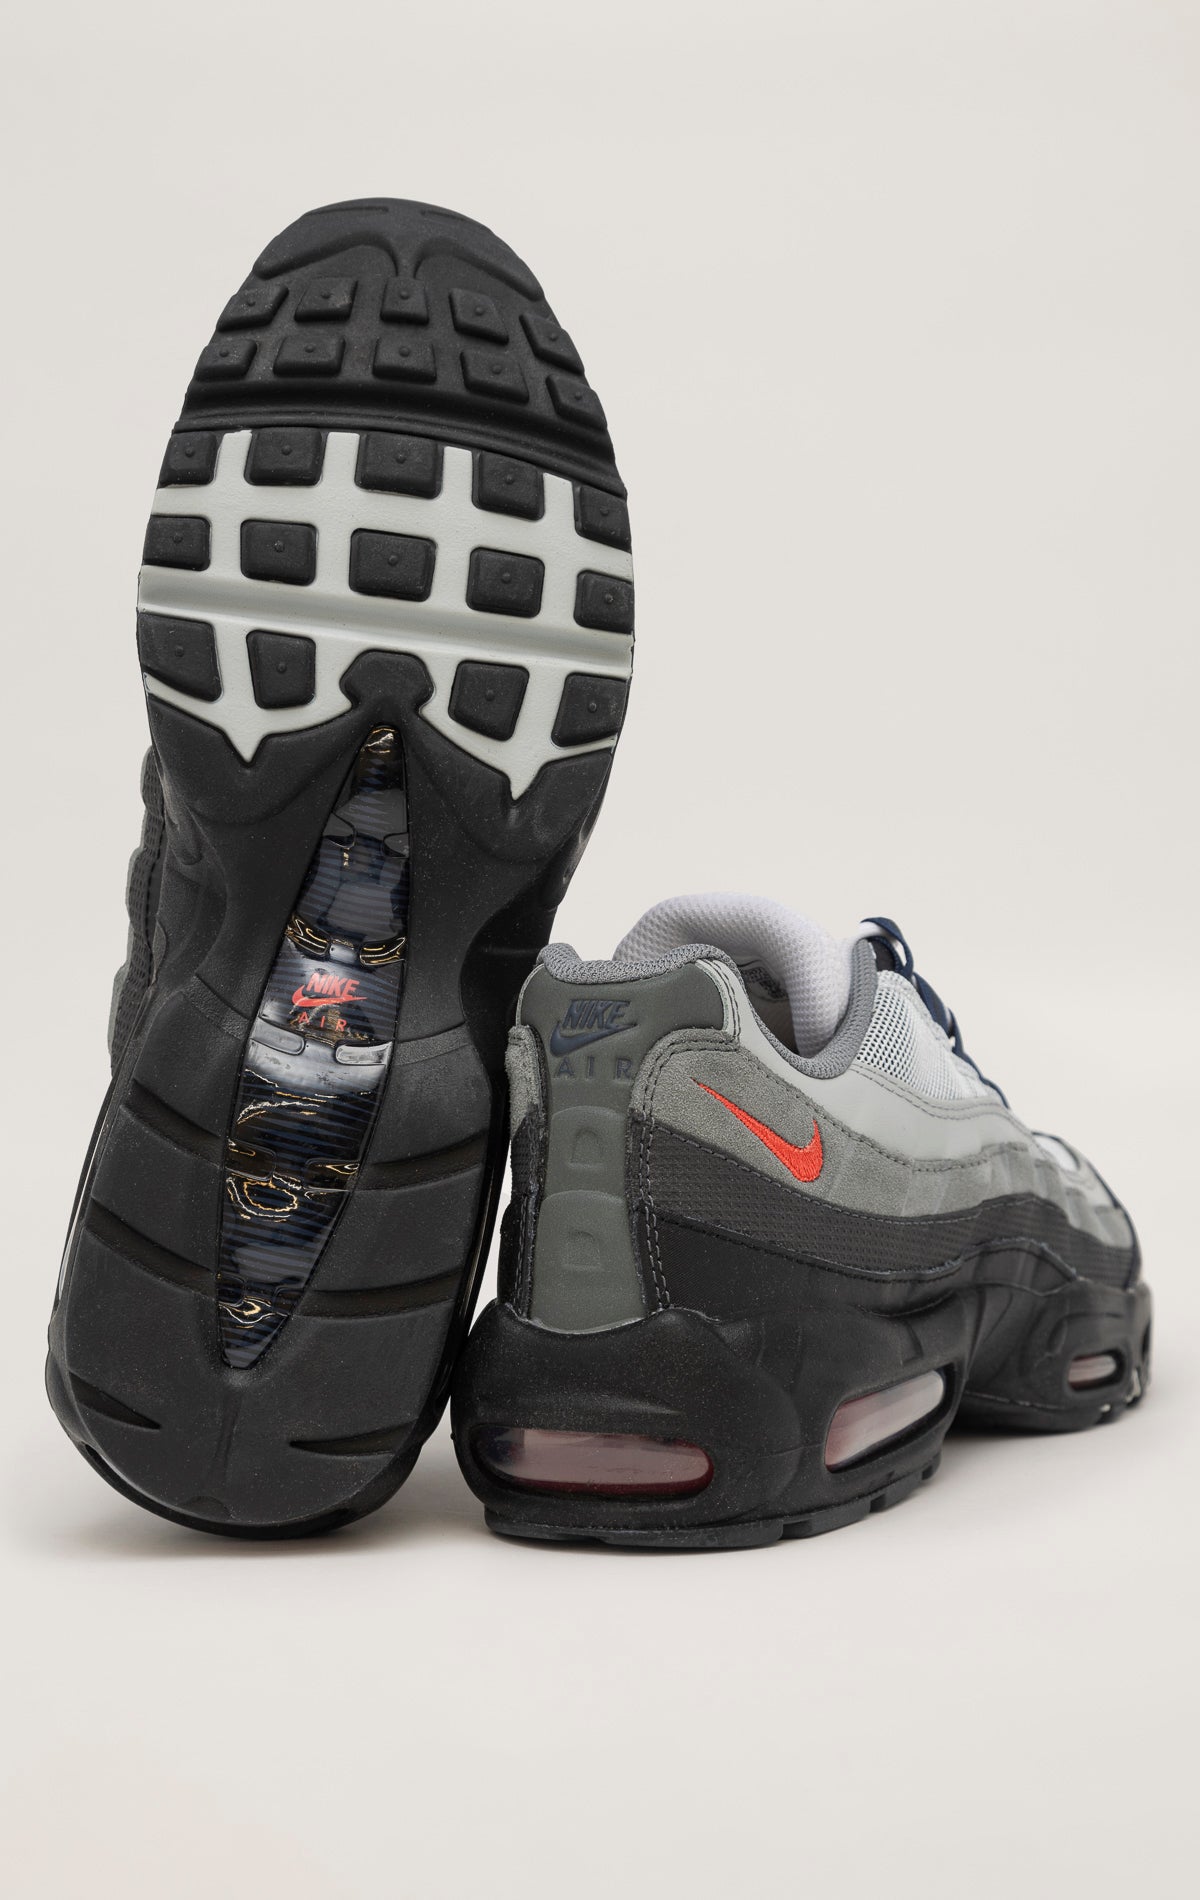 A black Nike Air Max 95 sneaker with a wavy mesh upper and visible Air cushioning units in the heel and forefoot. Anthracite and smoke grey accents contrast with pops of track red for a bold look.